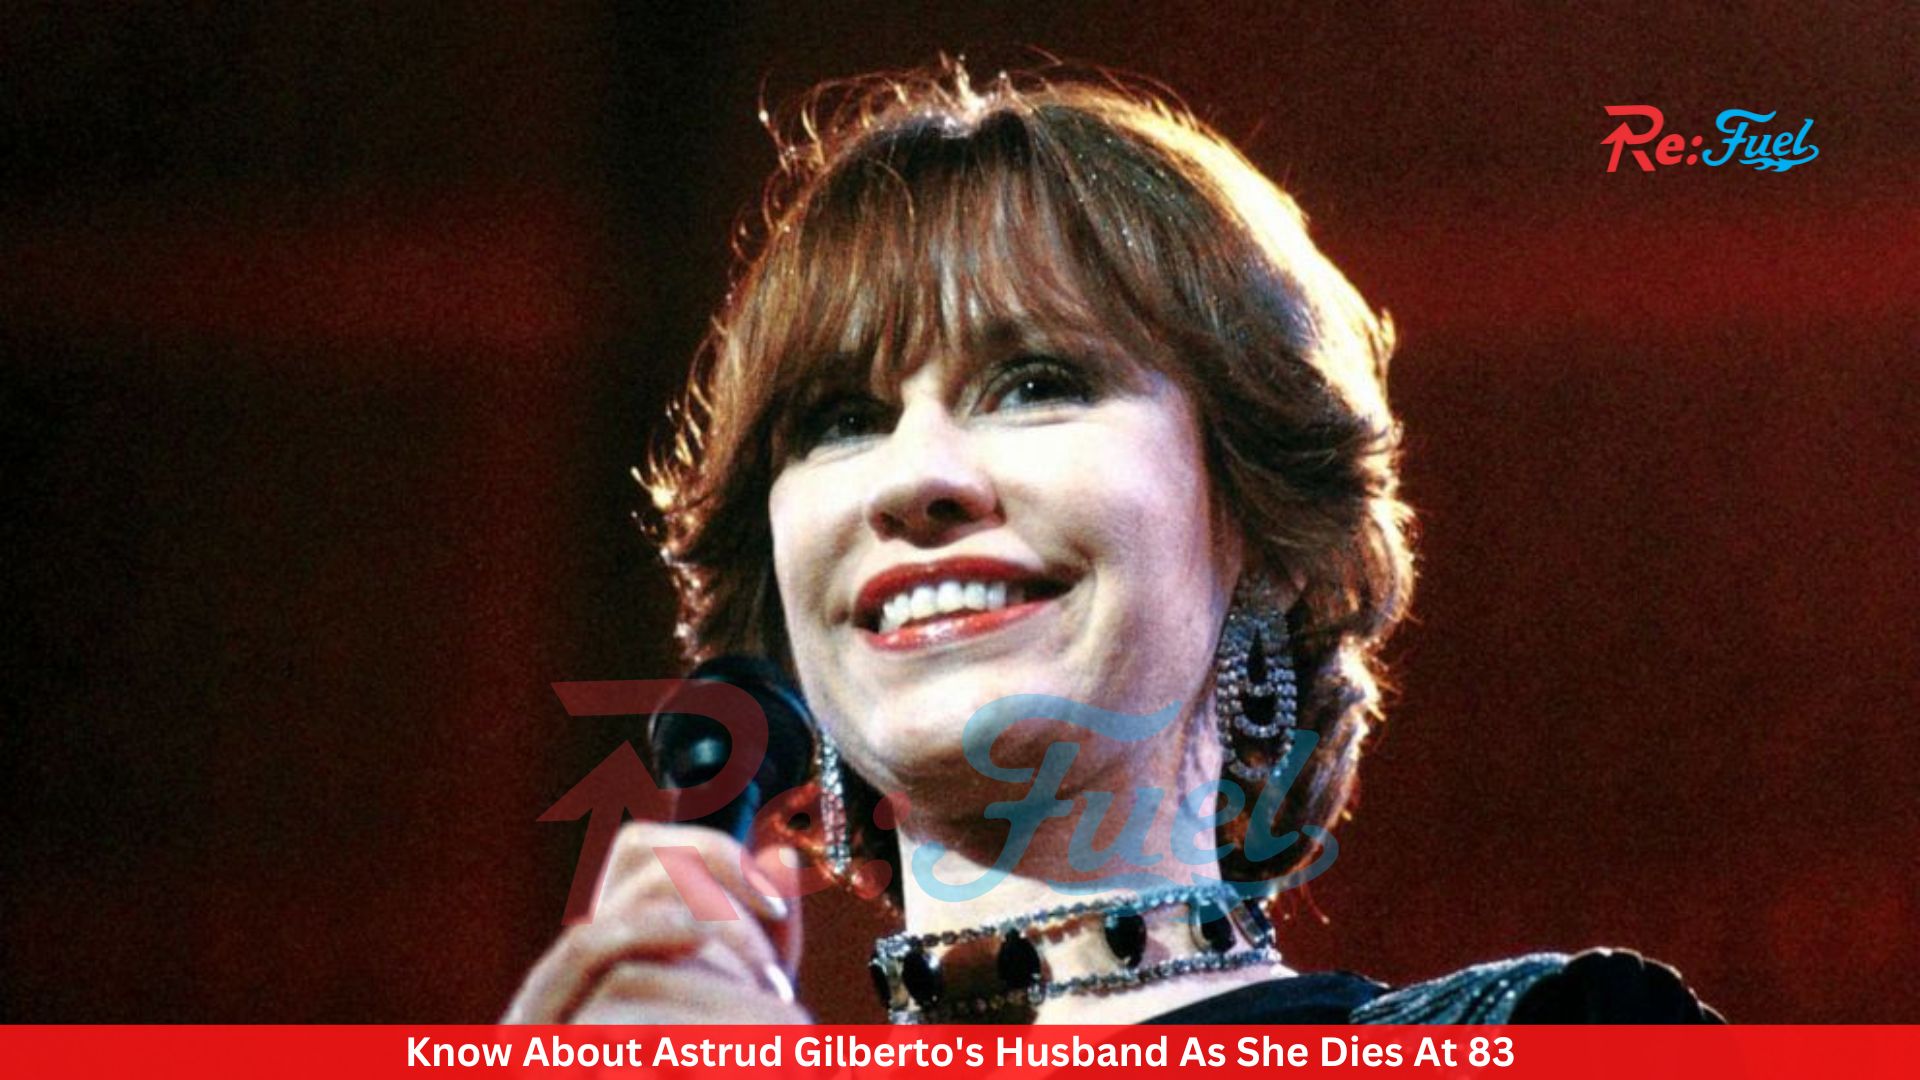 Know About Astrud Gilberto's Husband As She Dies At 83